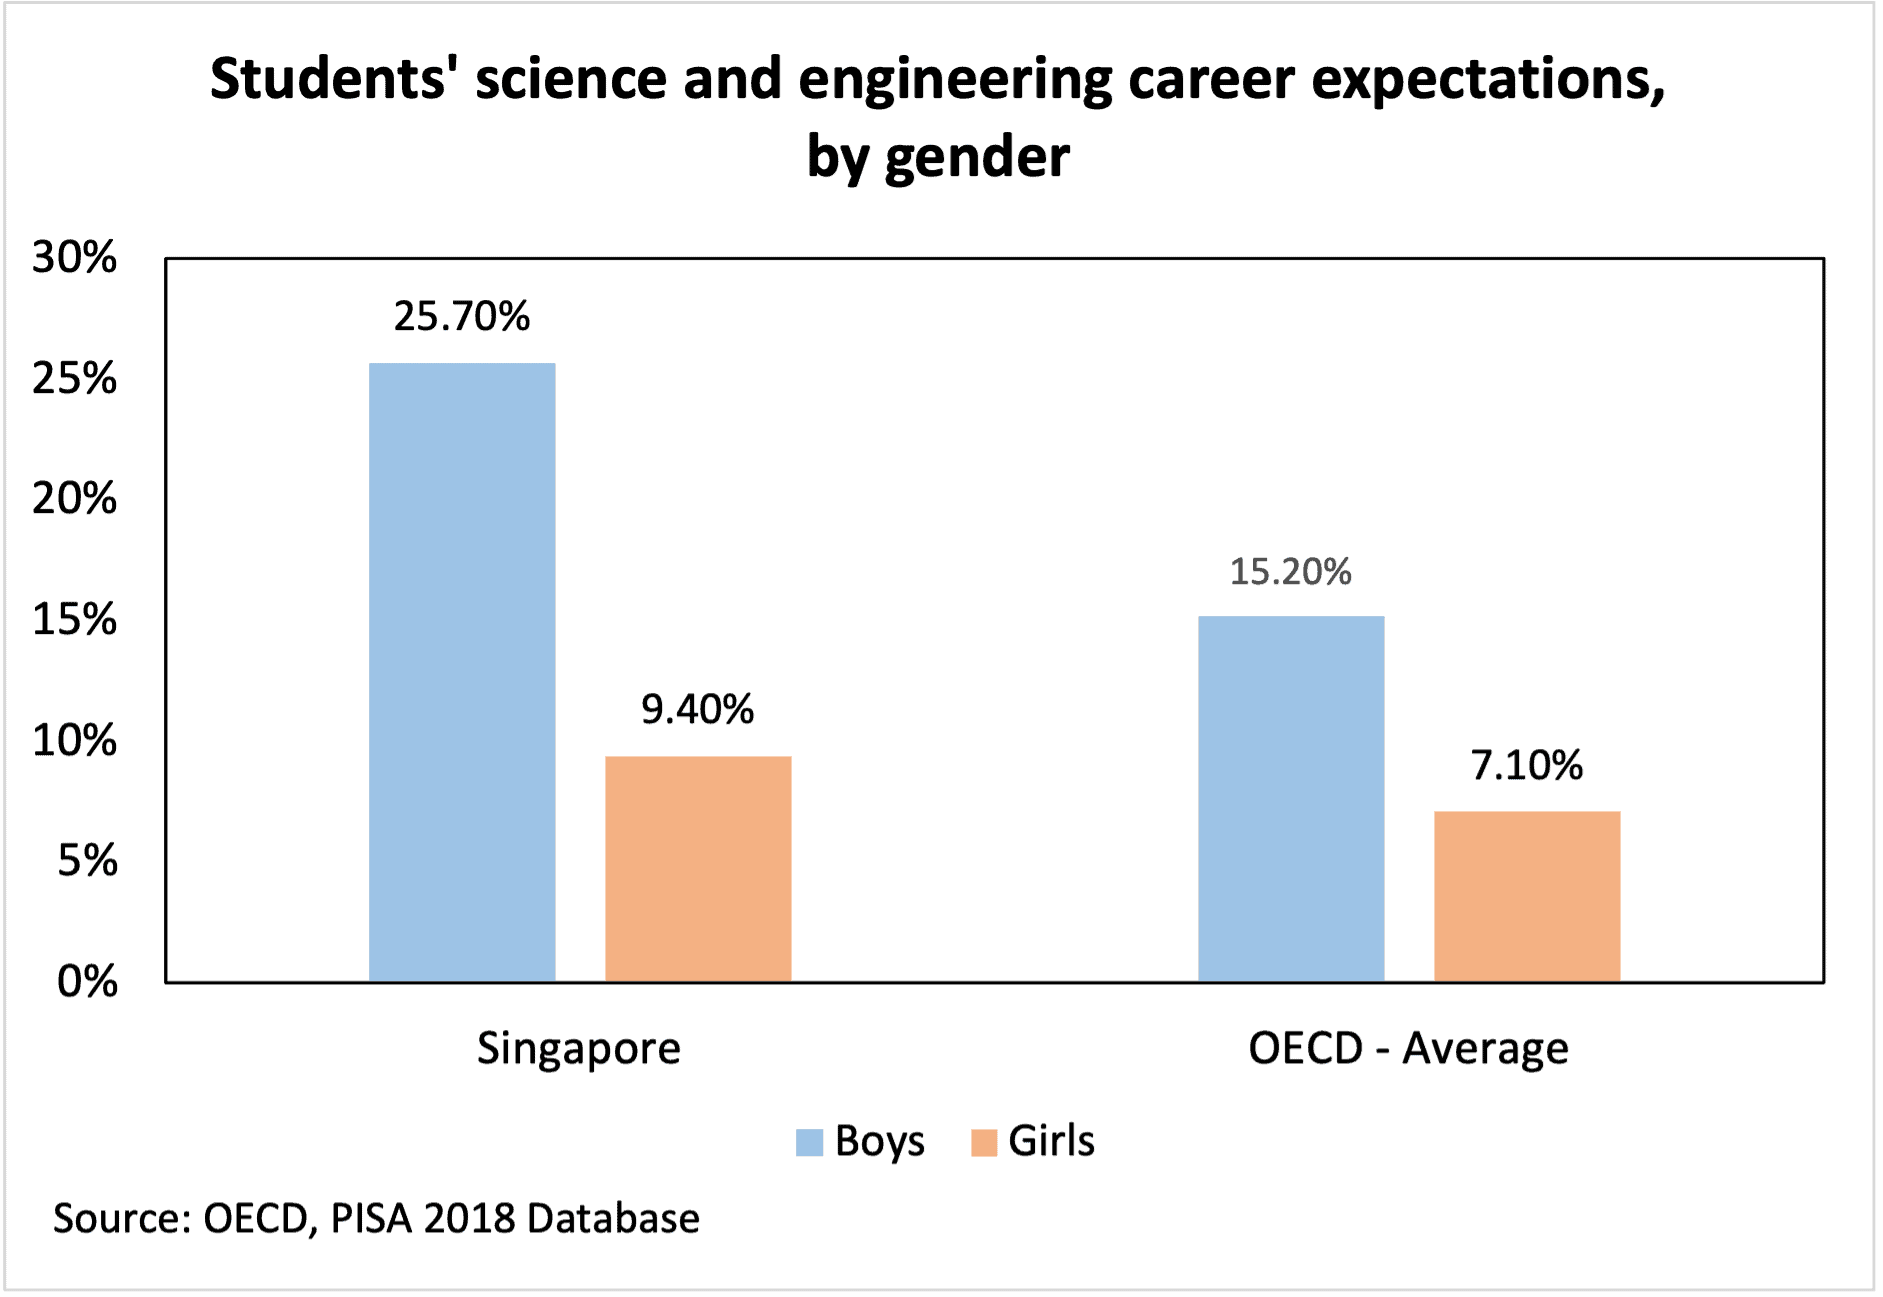 Singapore career expectations